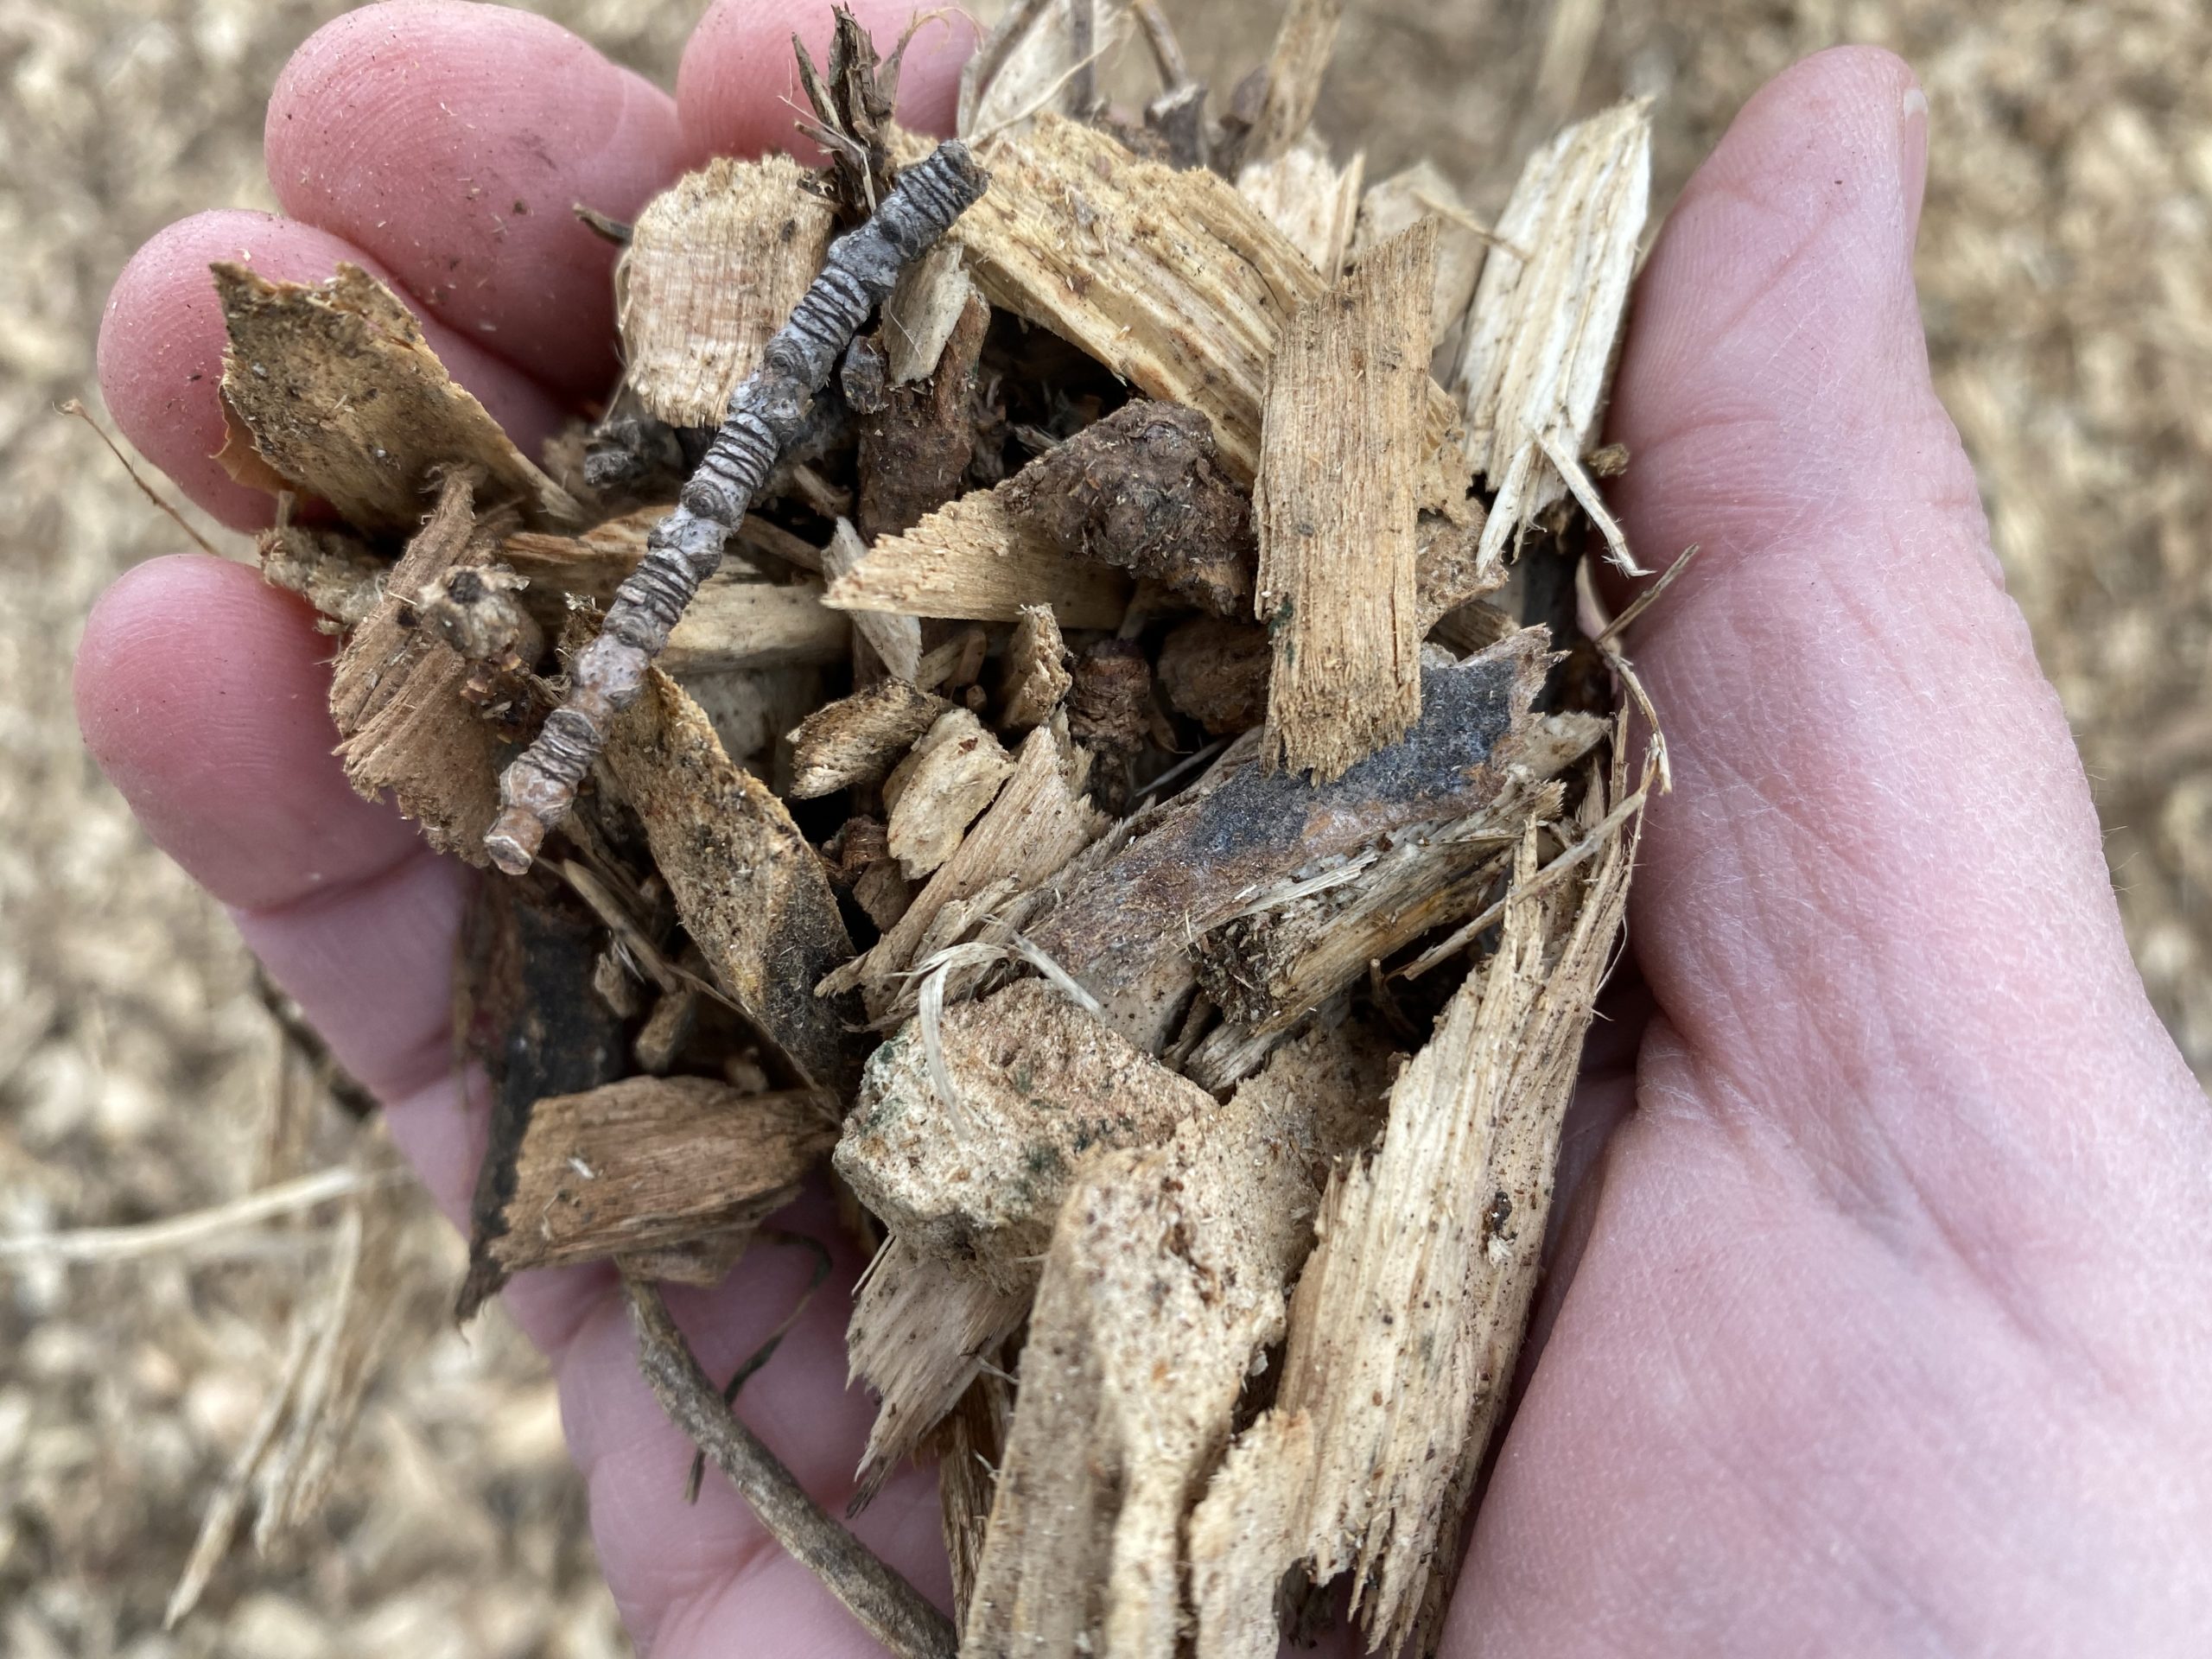 Arborist wood chips are the best type of mulch for your landscape